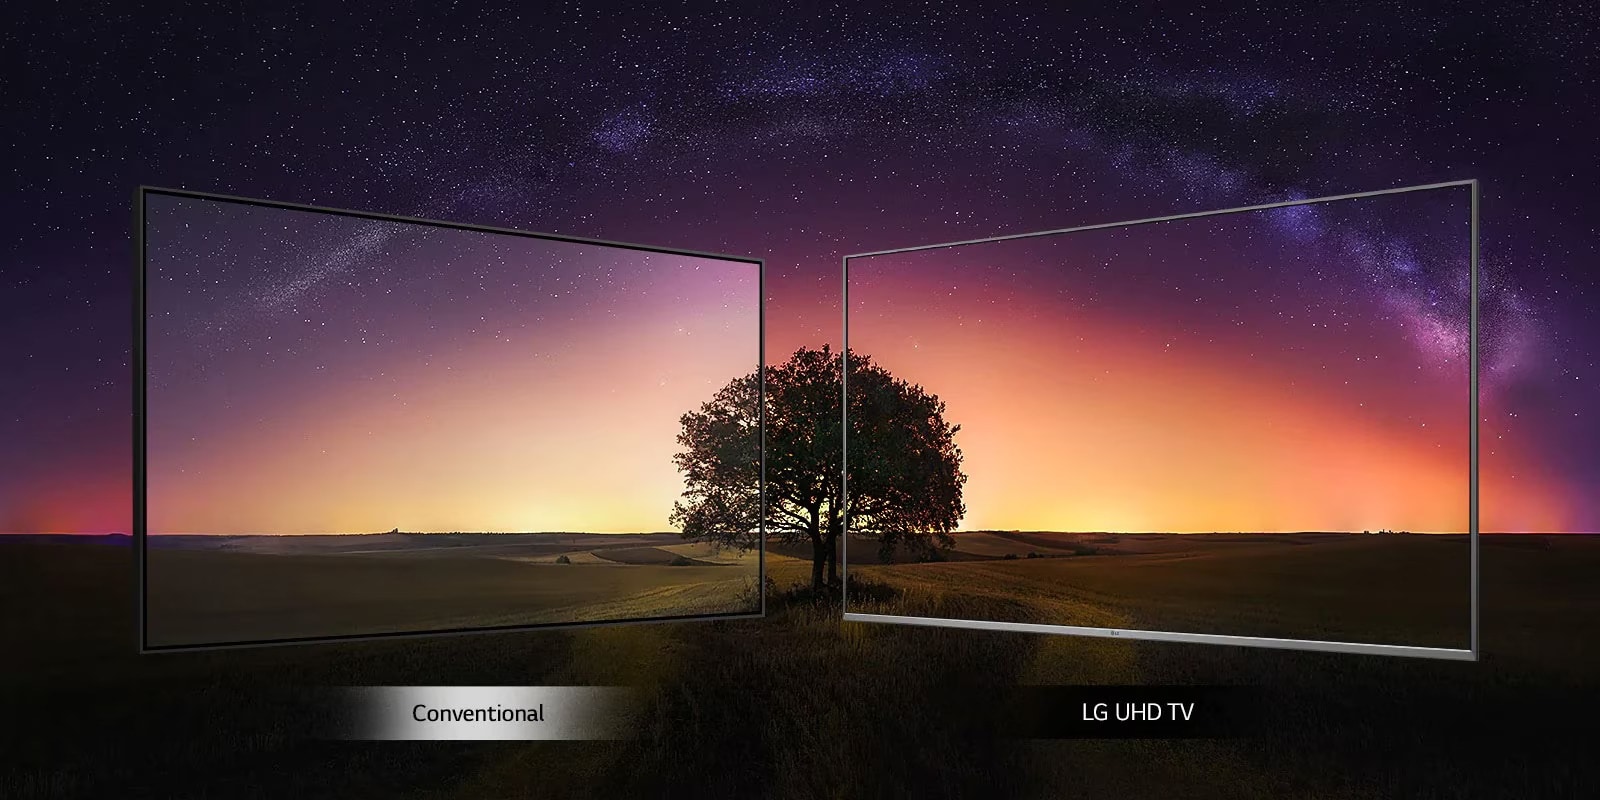 Thinking of Buying a 4K TV? Here's What You Should Know